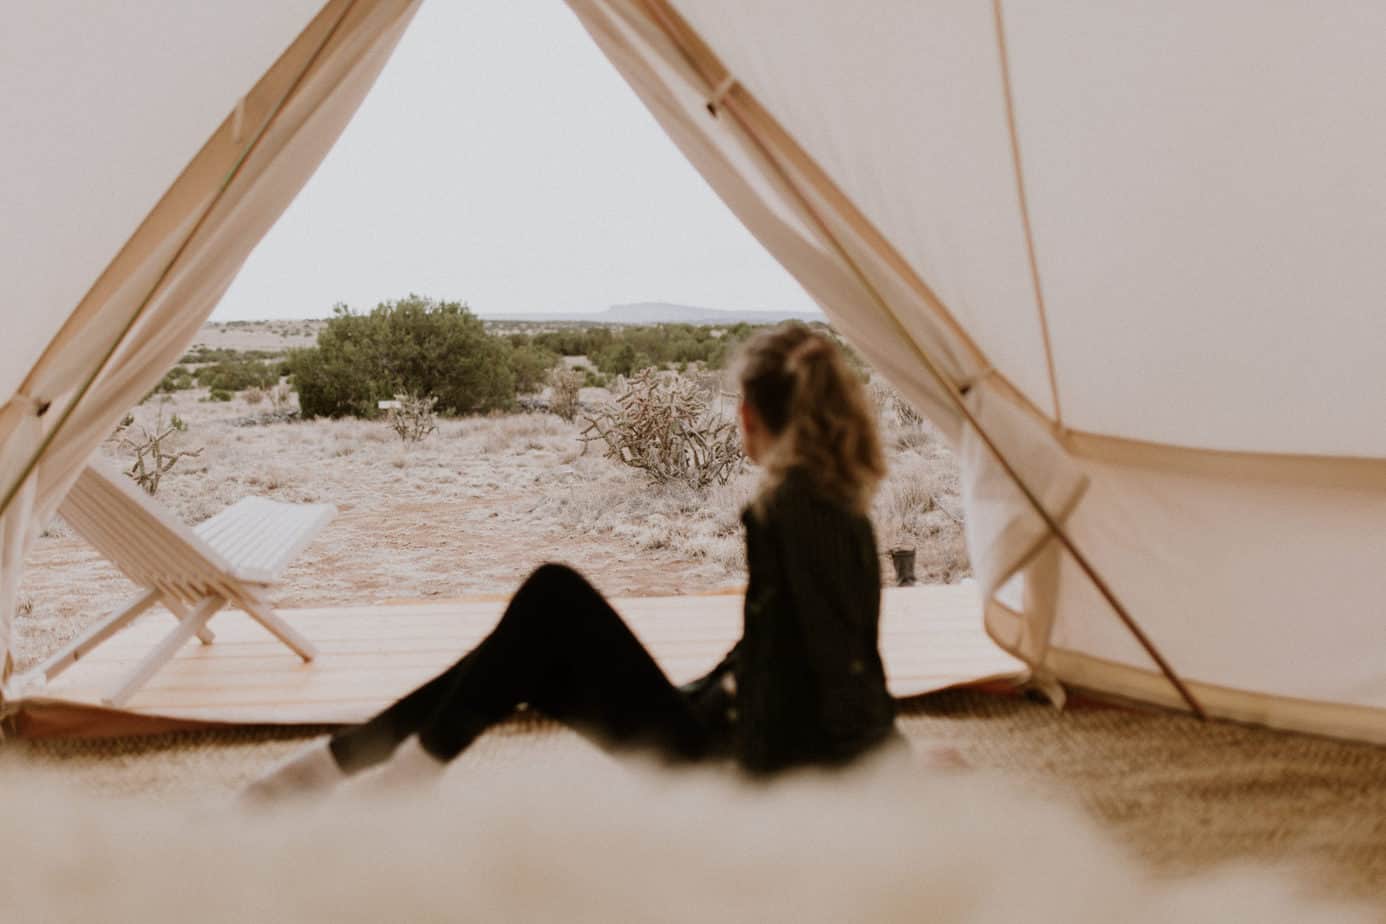 Girl Looking at Desert View in Canvas Safari Tent at Glamping Retreat in New Mexico